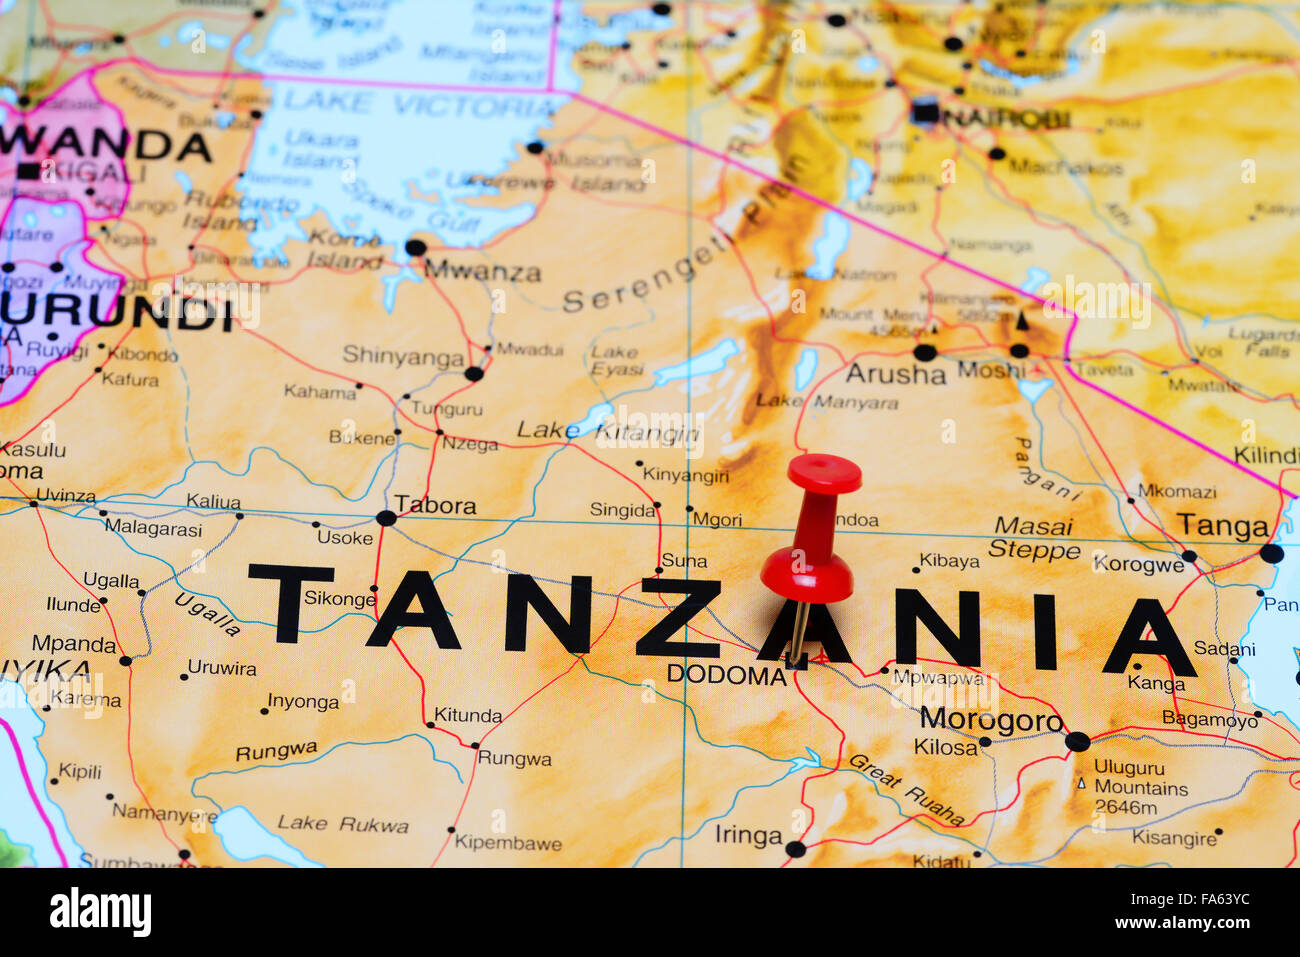 Dodoma pinned on a map of Africa Stock Photo